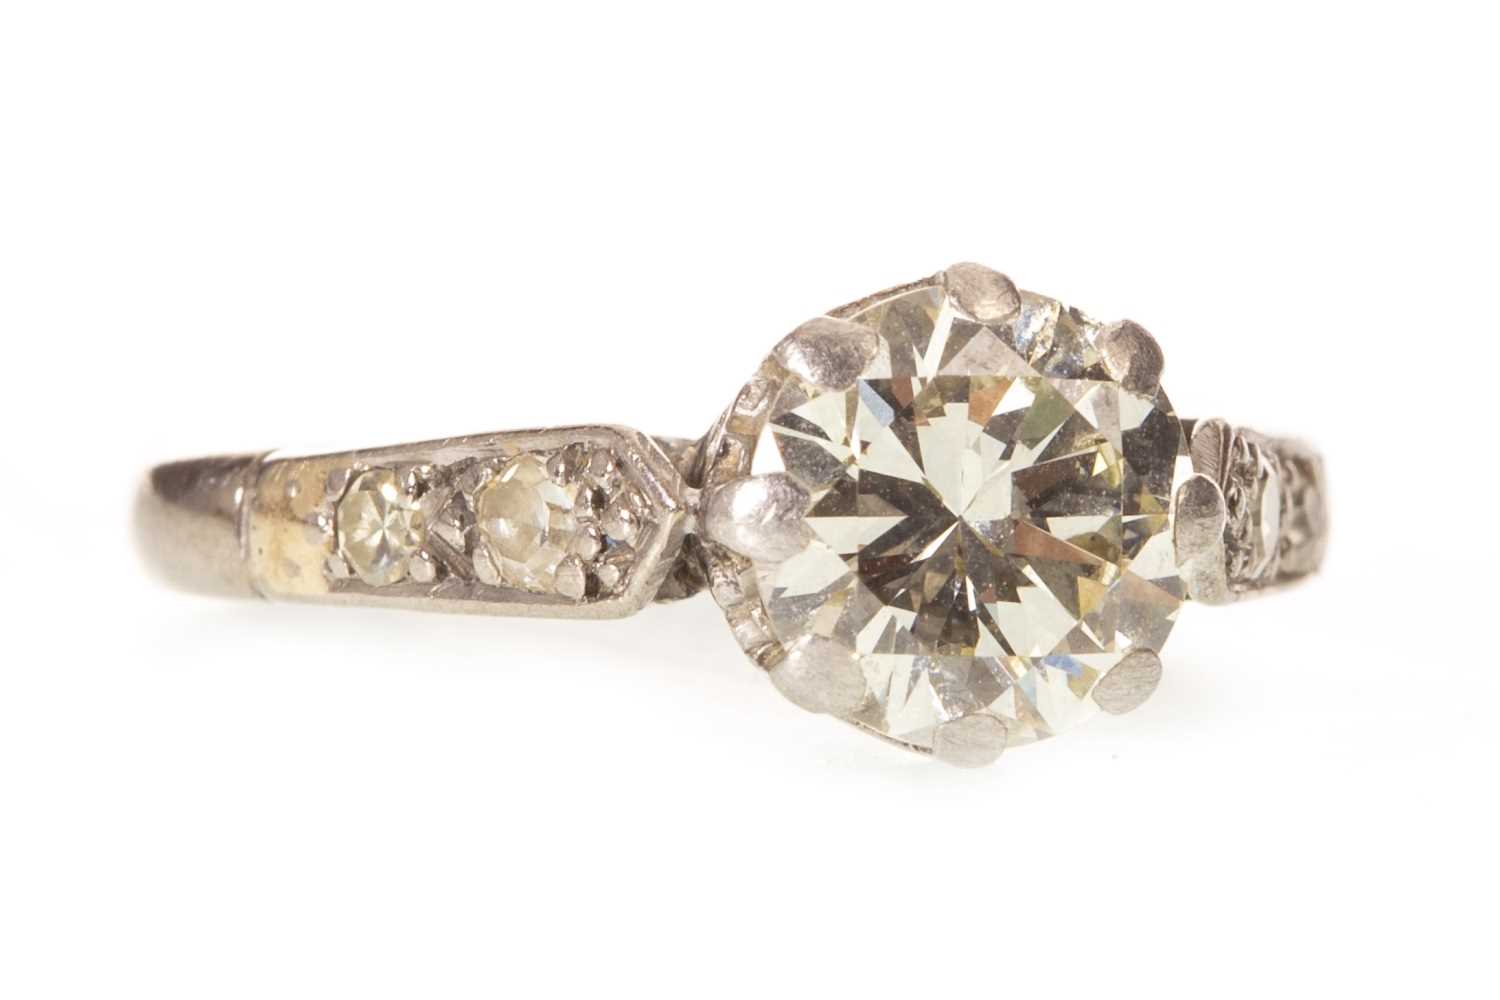 Lot 5 - AN EARLY 20TH CENTURY DIAMOND SOLITAIRE RING